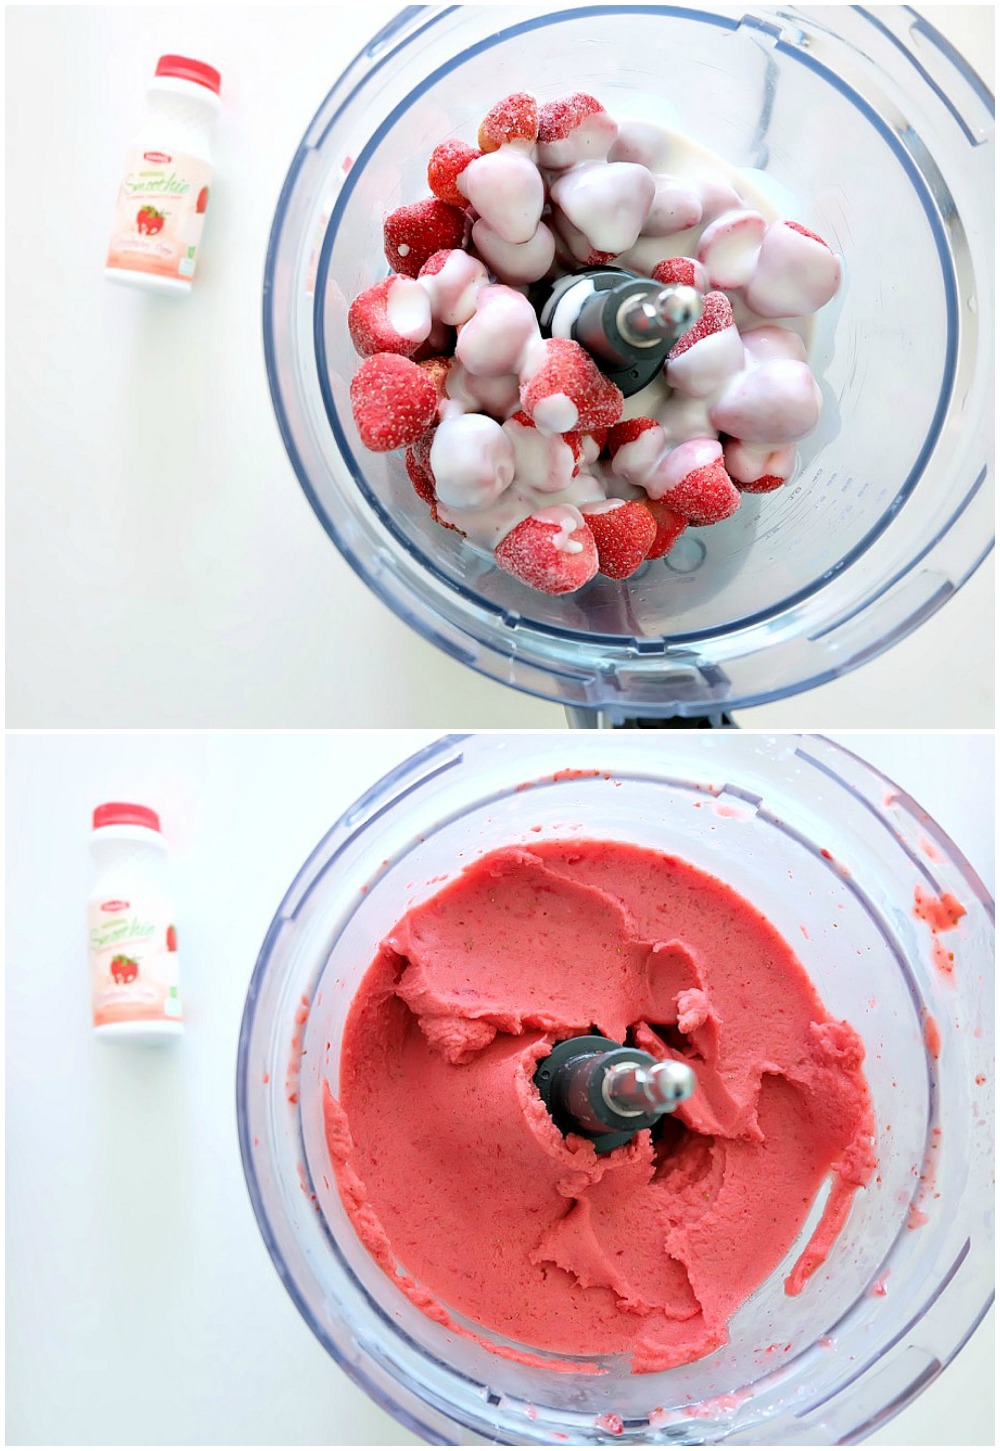 This healthy 2 ingredient no churn frozen yogurt recipe is seriously THE BEST! It takes less than 5 minutes to make and kids love it! Pair it with delicious toppings for a frozen yogurt breakfast parfait smoothie bowl! Quick, easy. healthy and perfect for busy school mornings! 